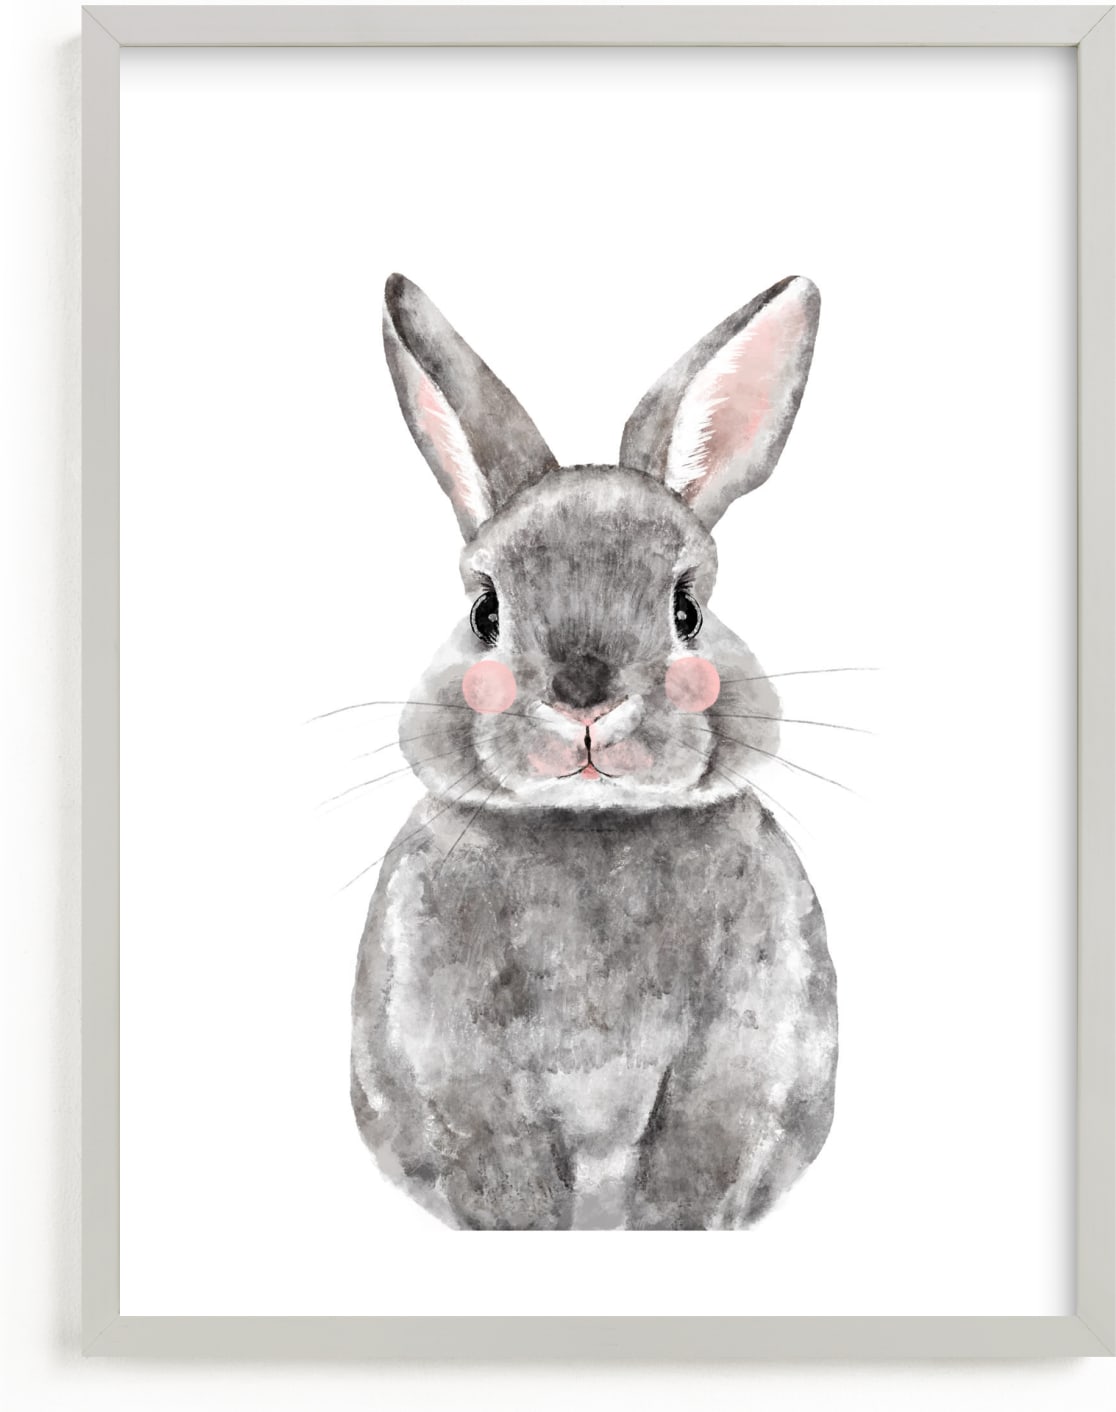 This is a white art by Cass Loh called Baby Animal Rabbit.